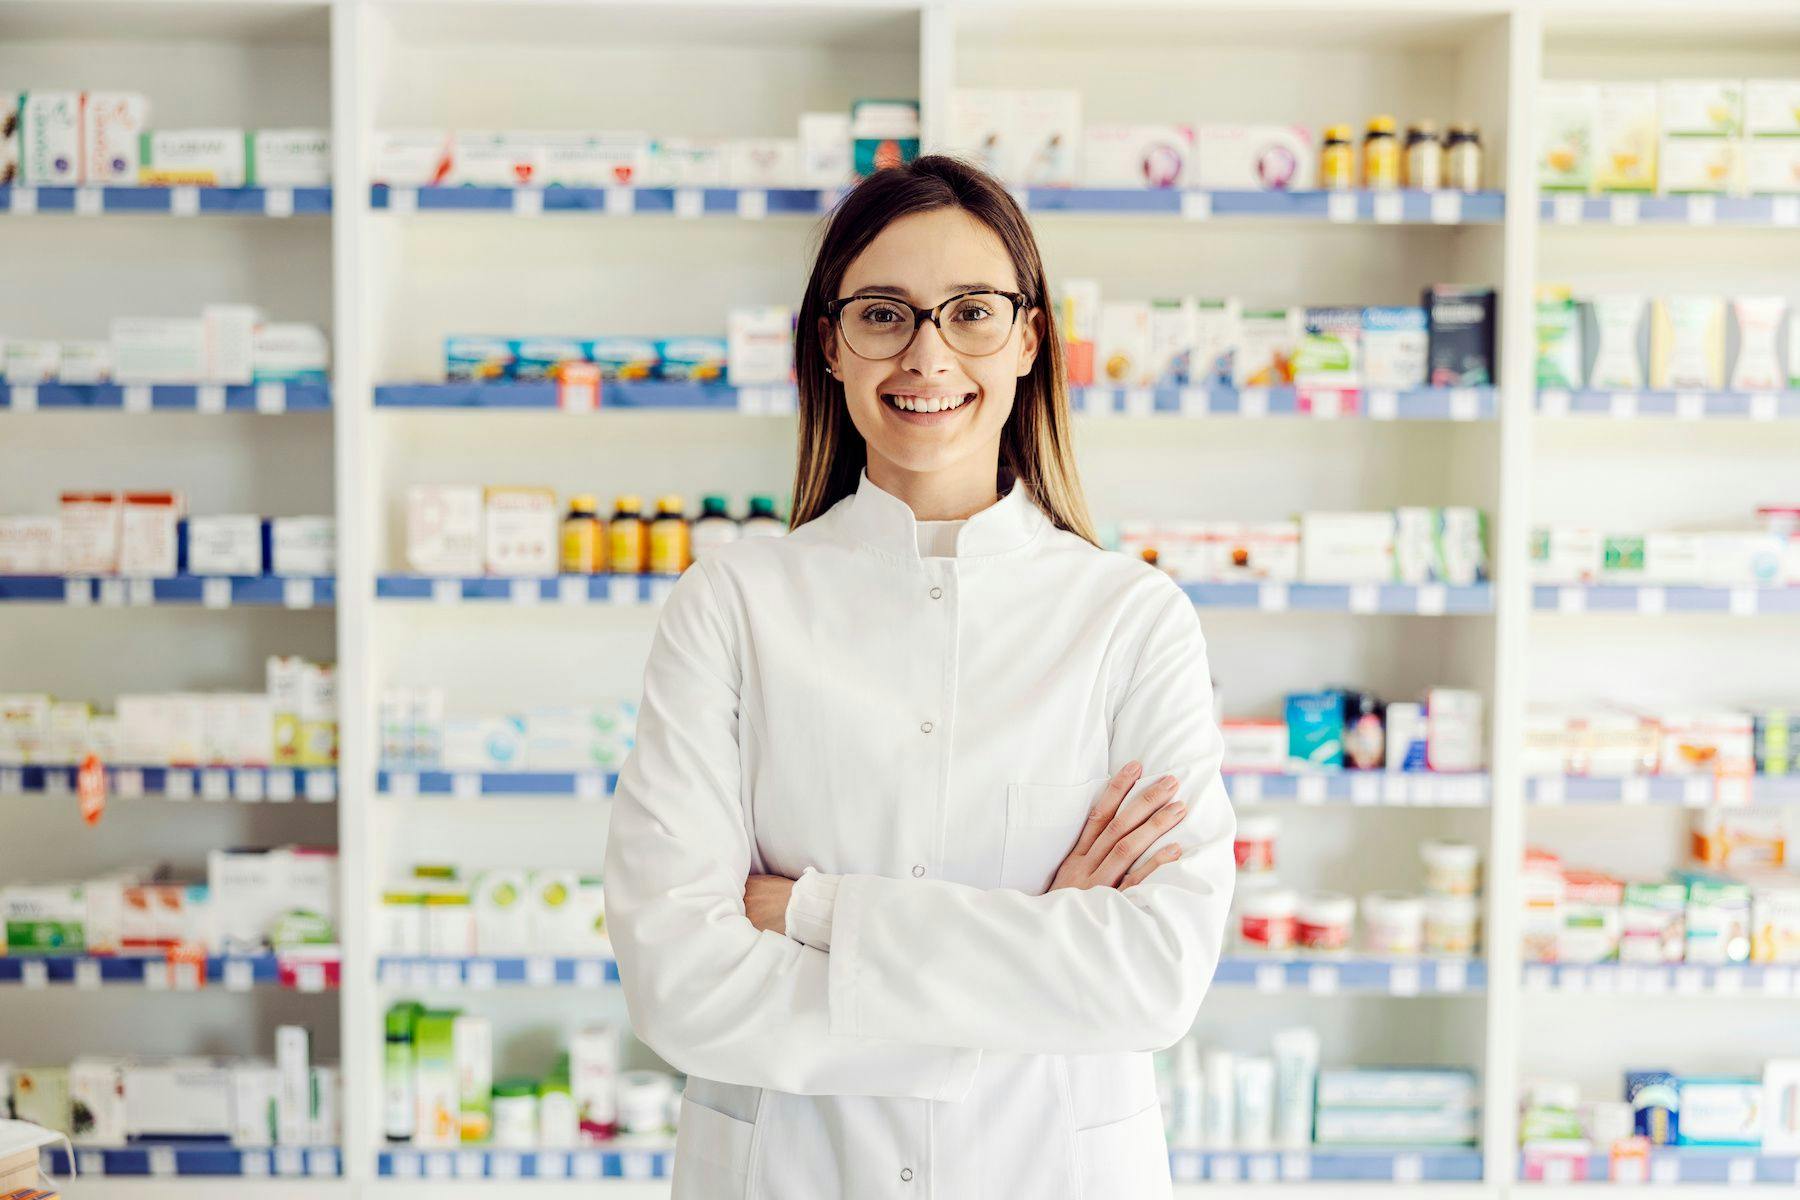 Health Care Providers Increasingly Believe Pharmacists Should Take on More Primary Care Duties